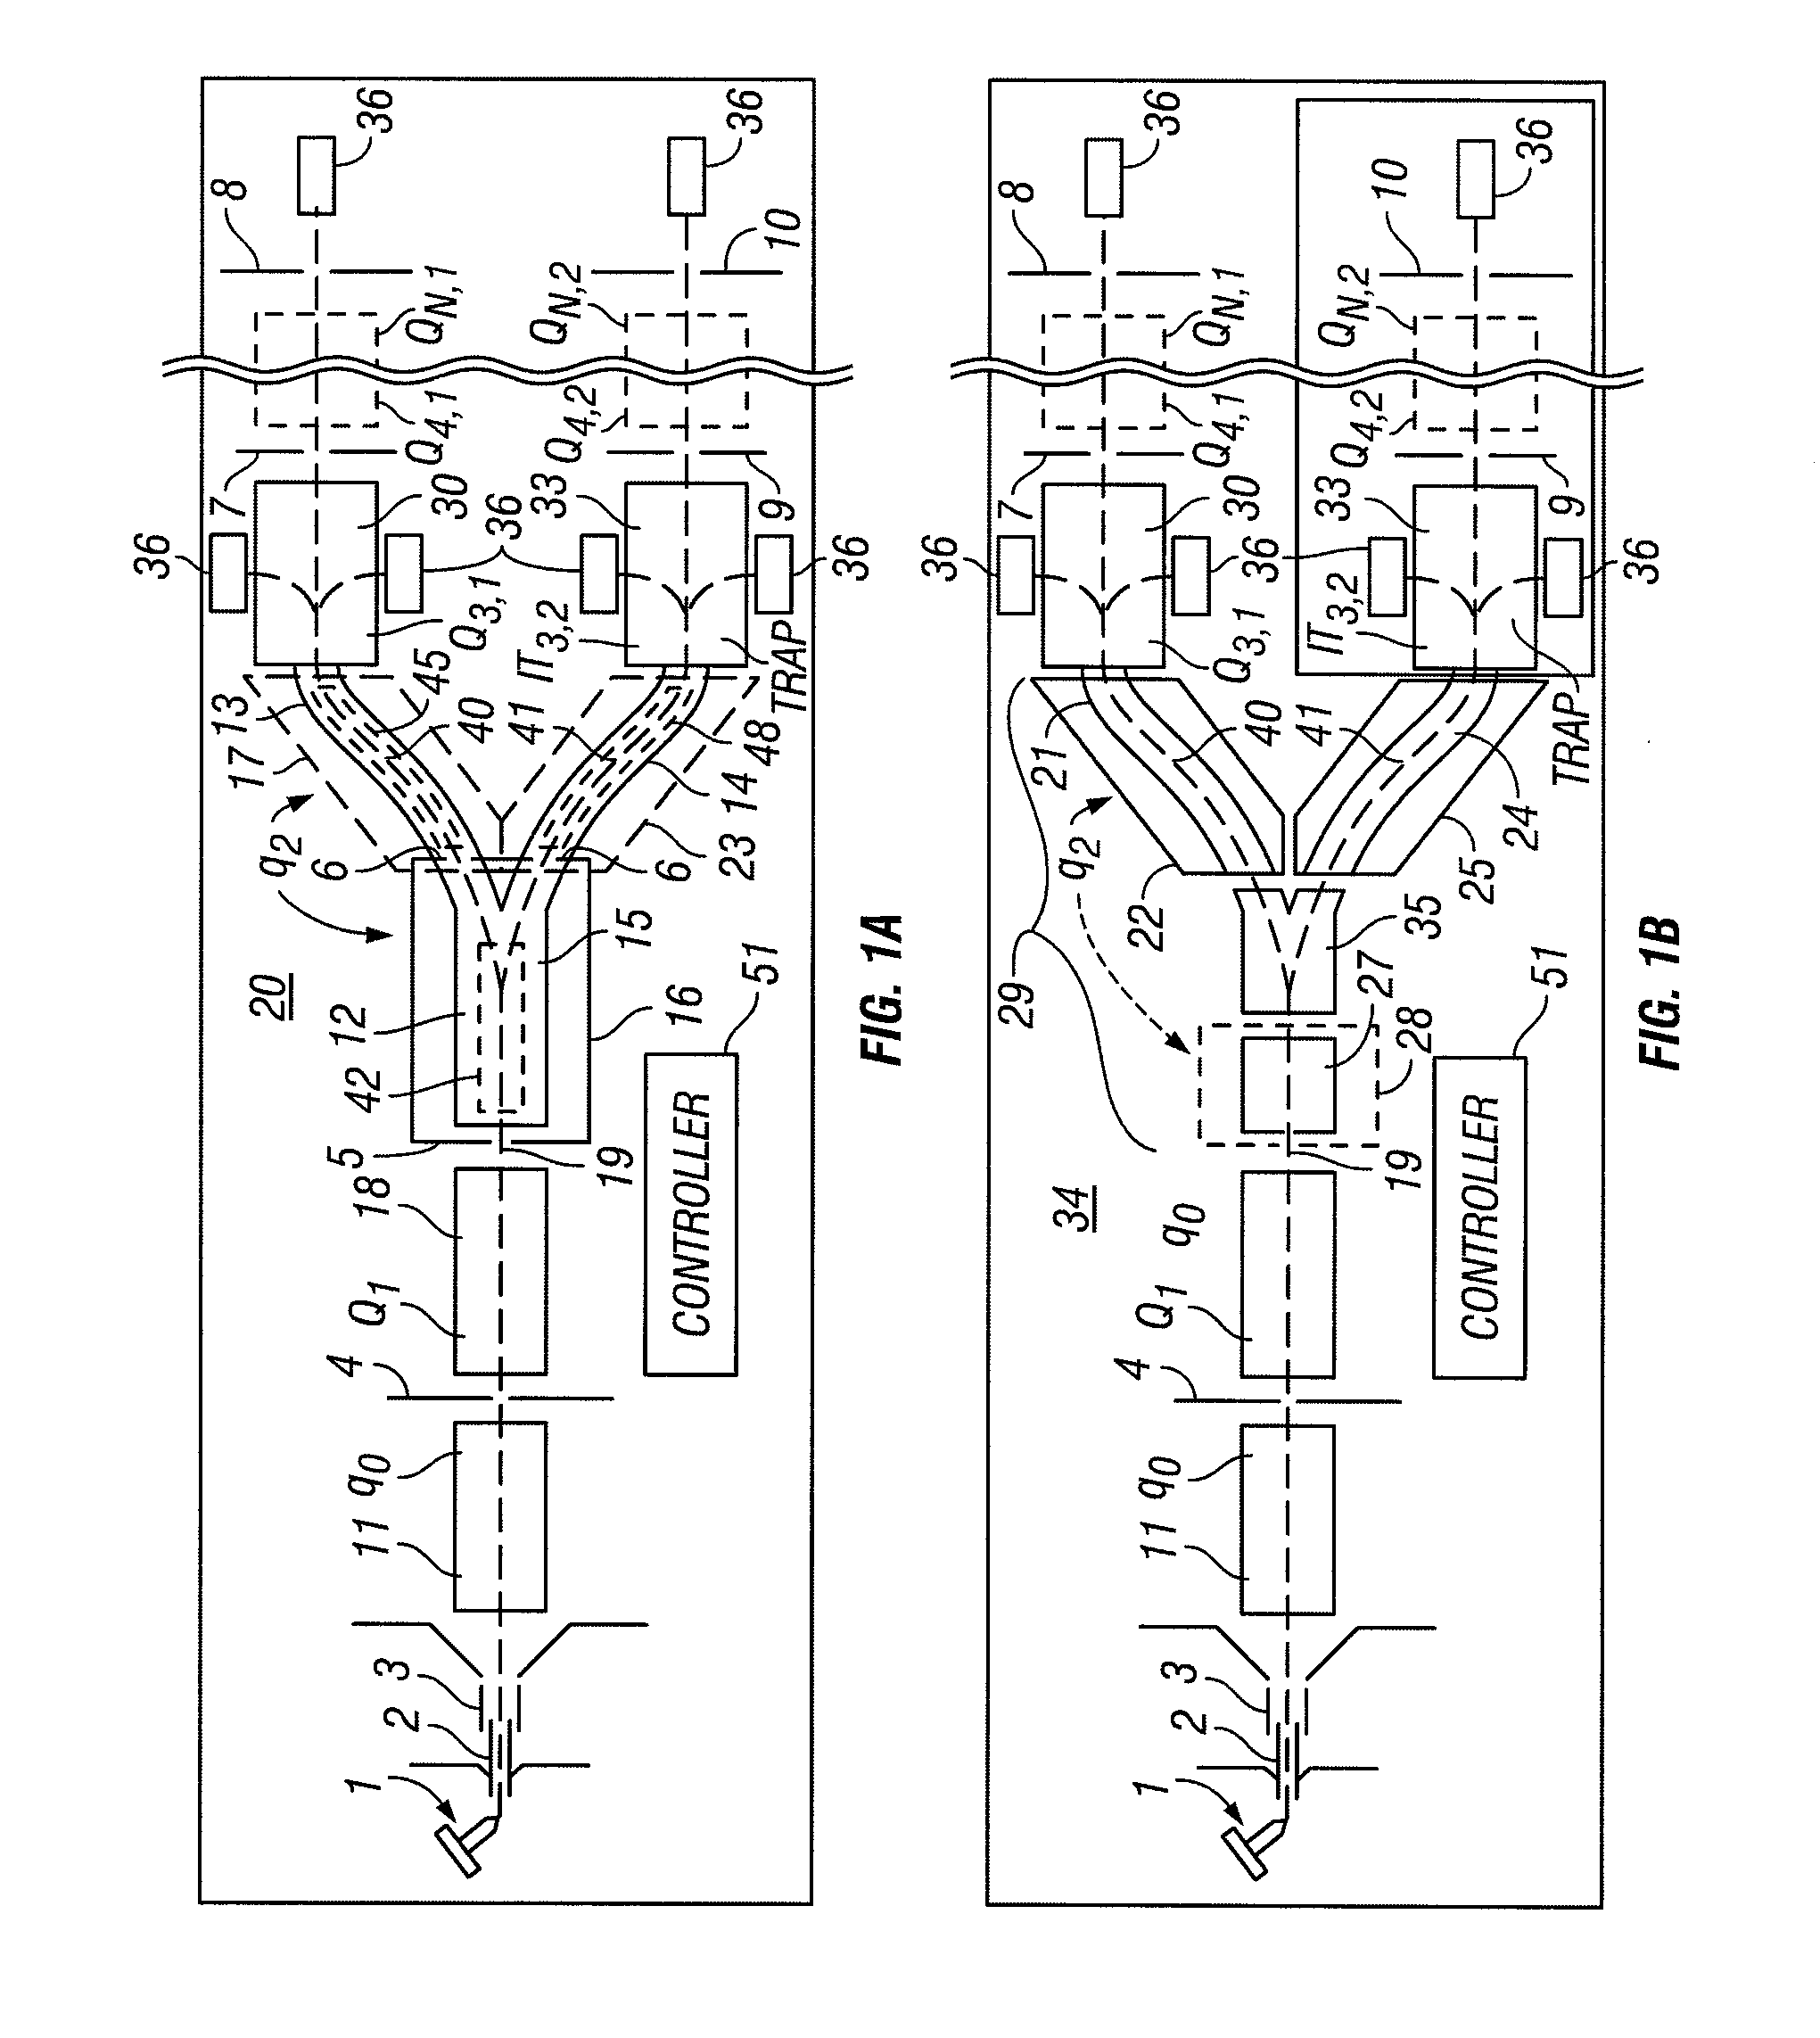 Hybrid mass spectrometer with branched ion path and switch